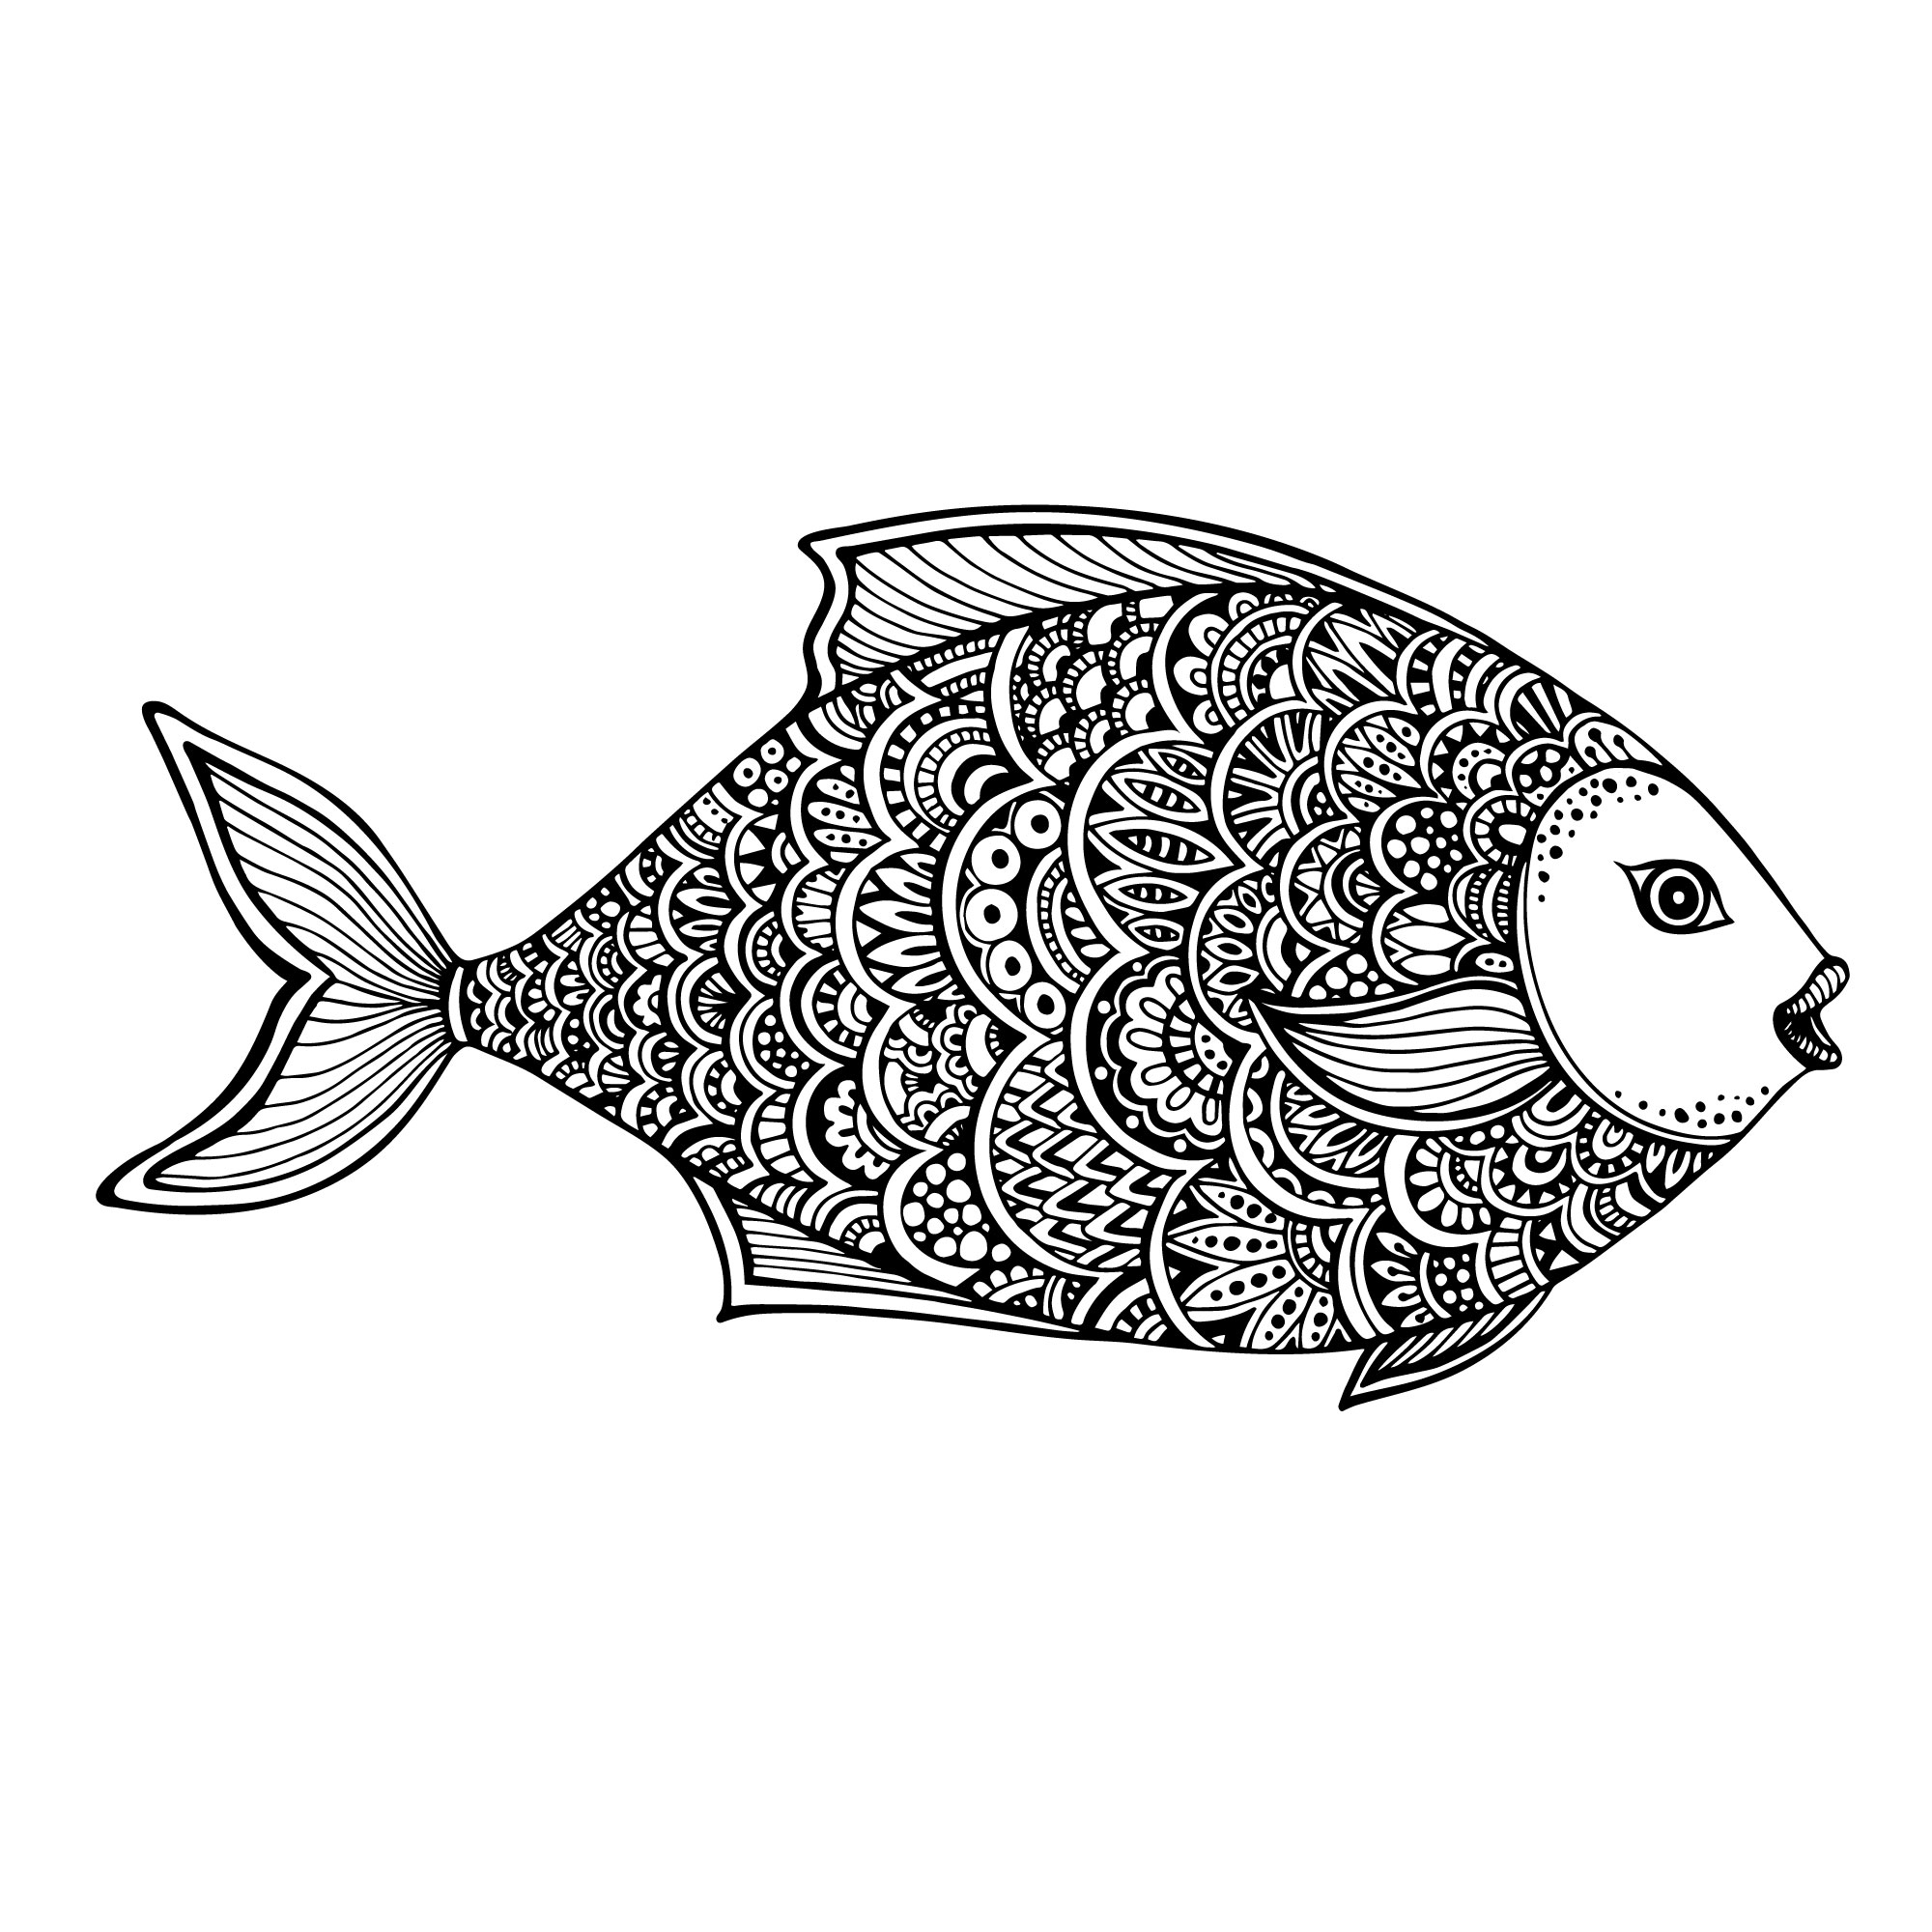 Zentangle Fish (.eps) Free Vector Download - 3axis.co